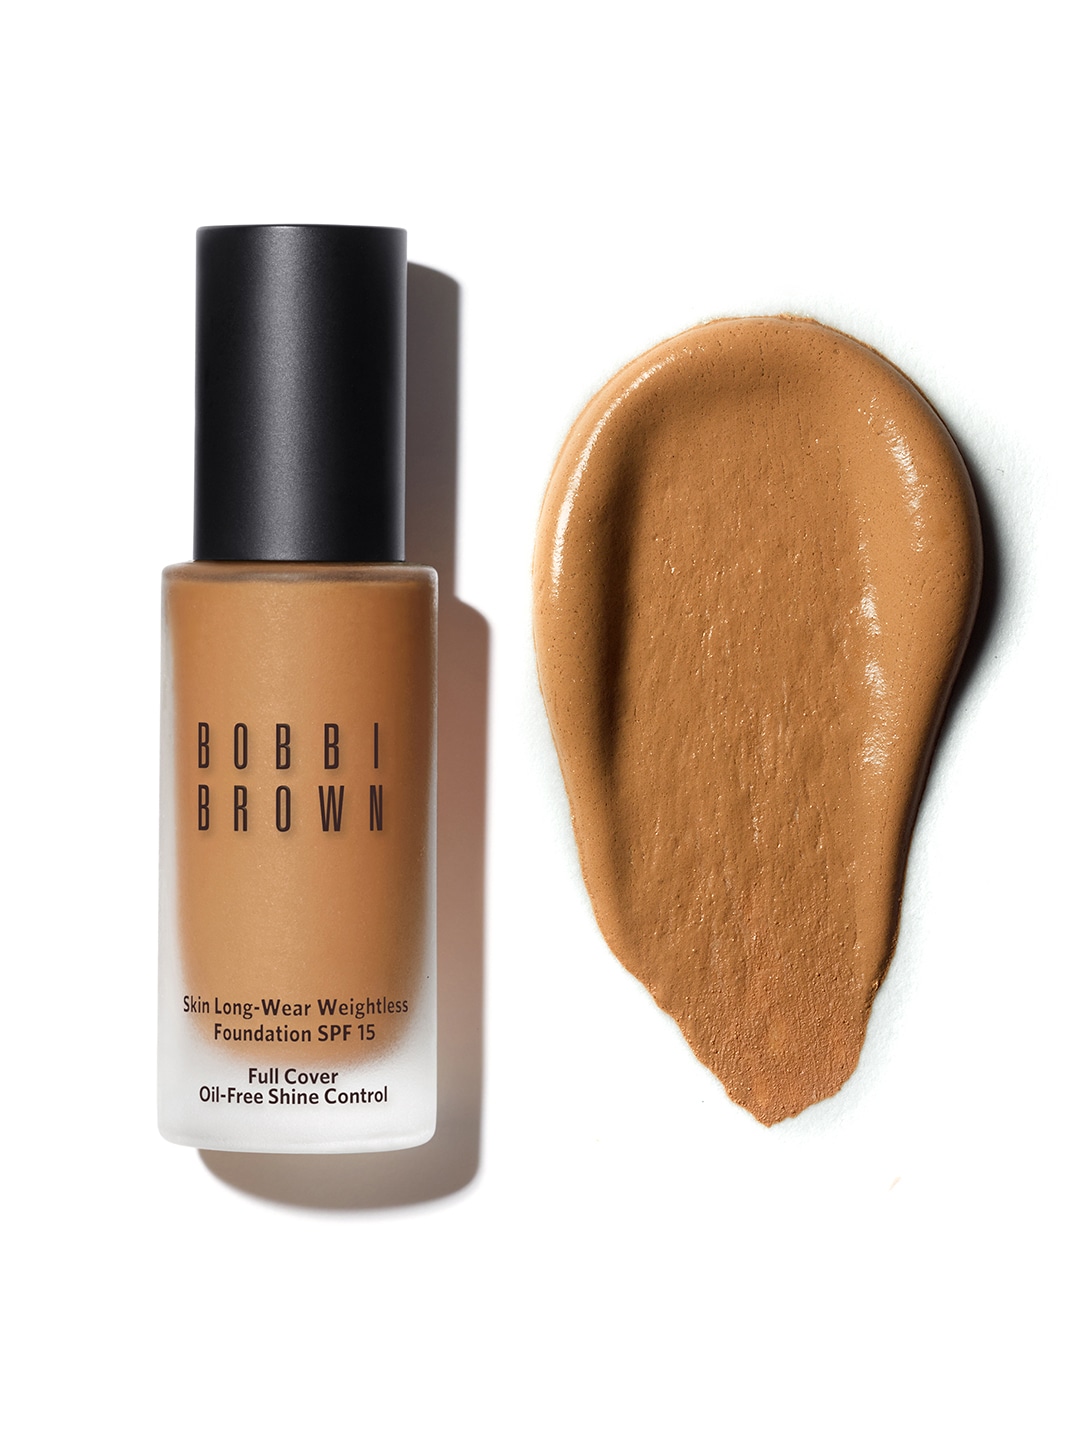 Bobbi Brown Skin Long-Wear Weightless Foundation with SPF 15 - Honey (W-064/5) 30ml Price in India